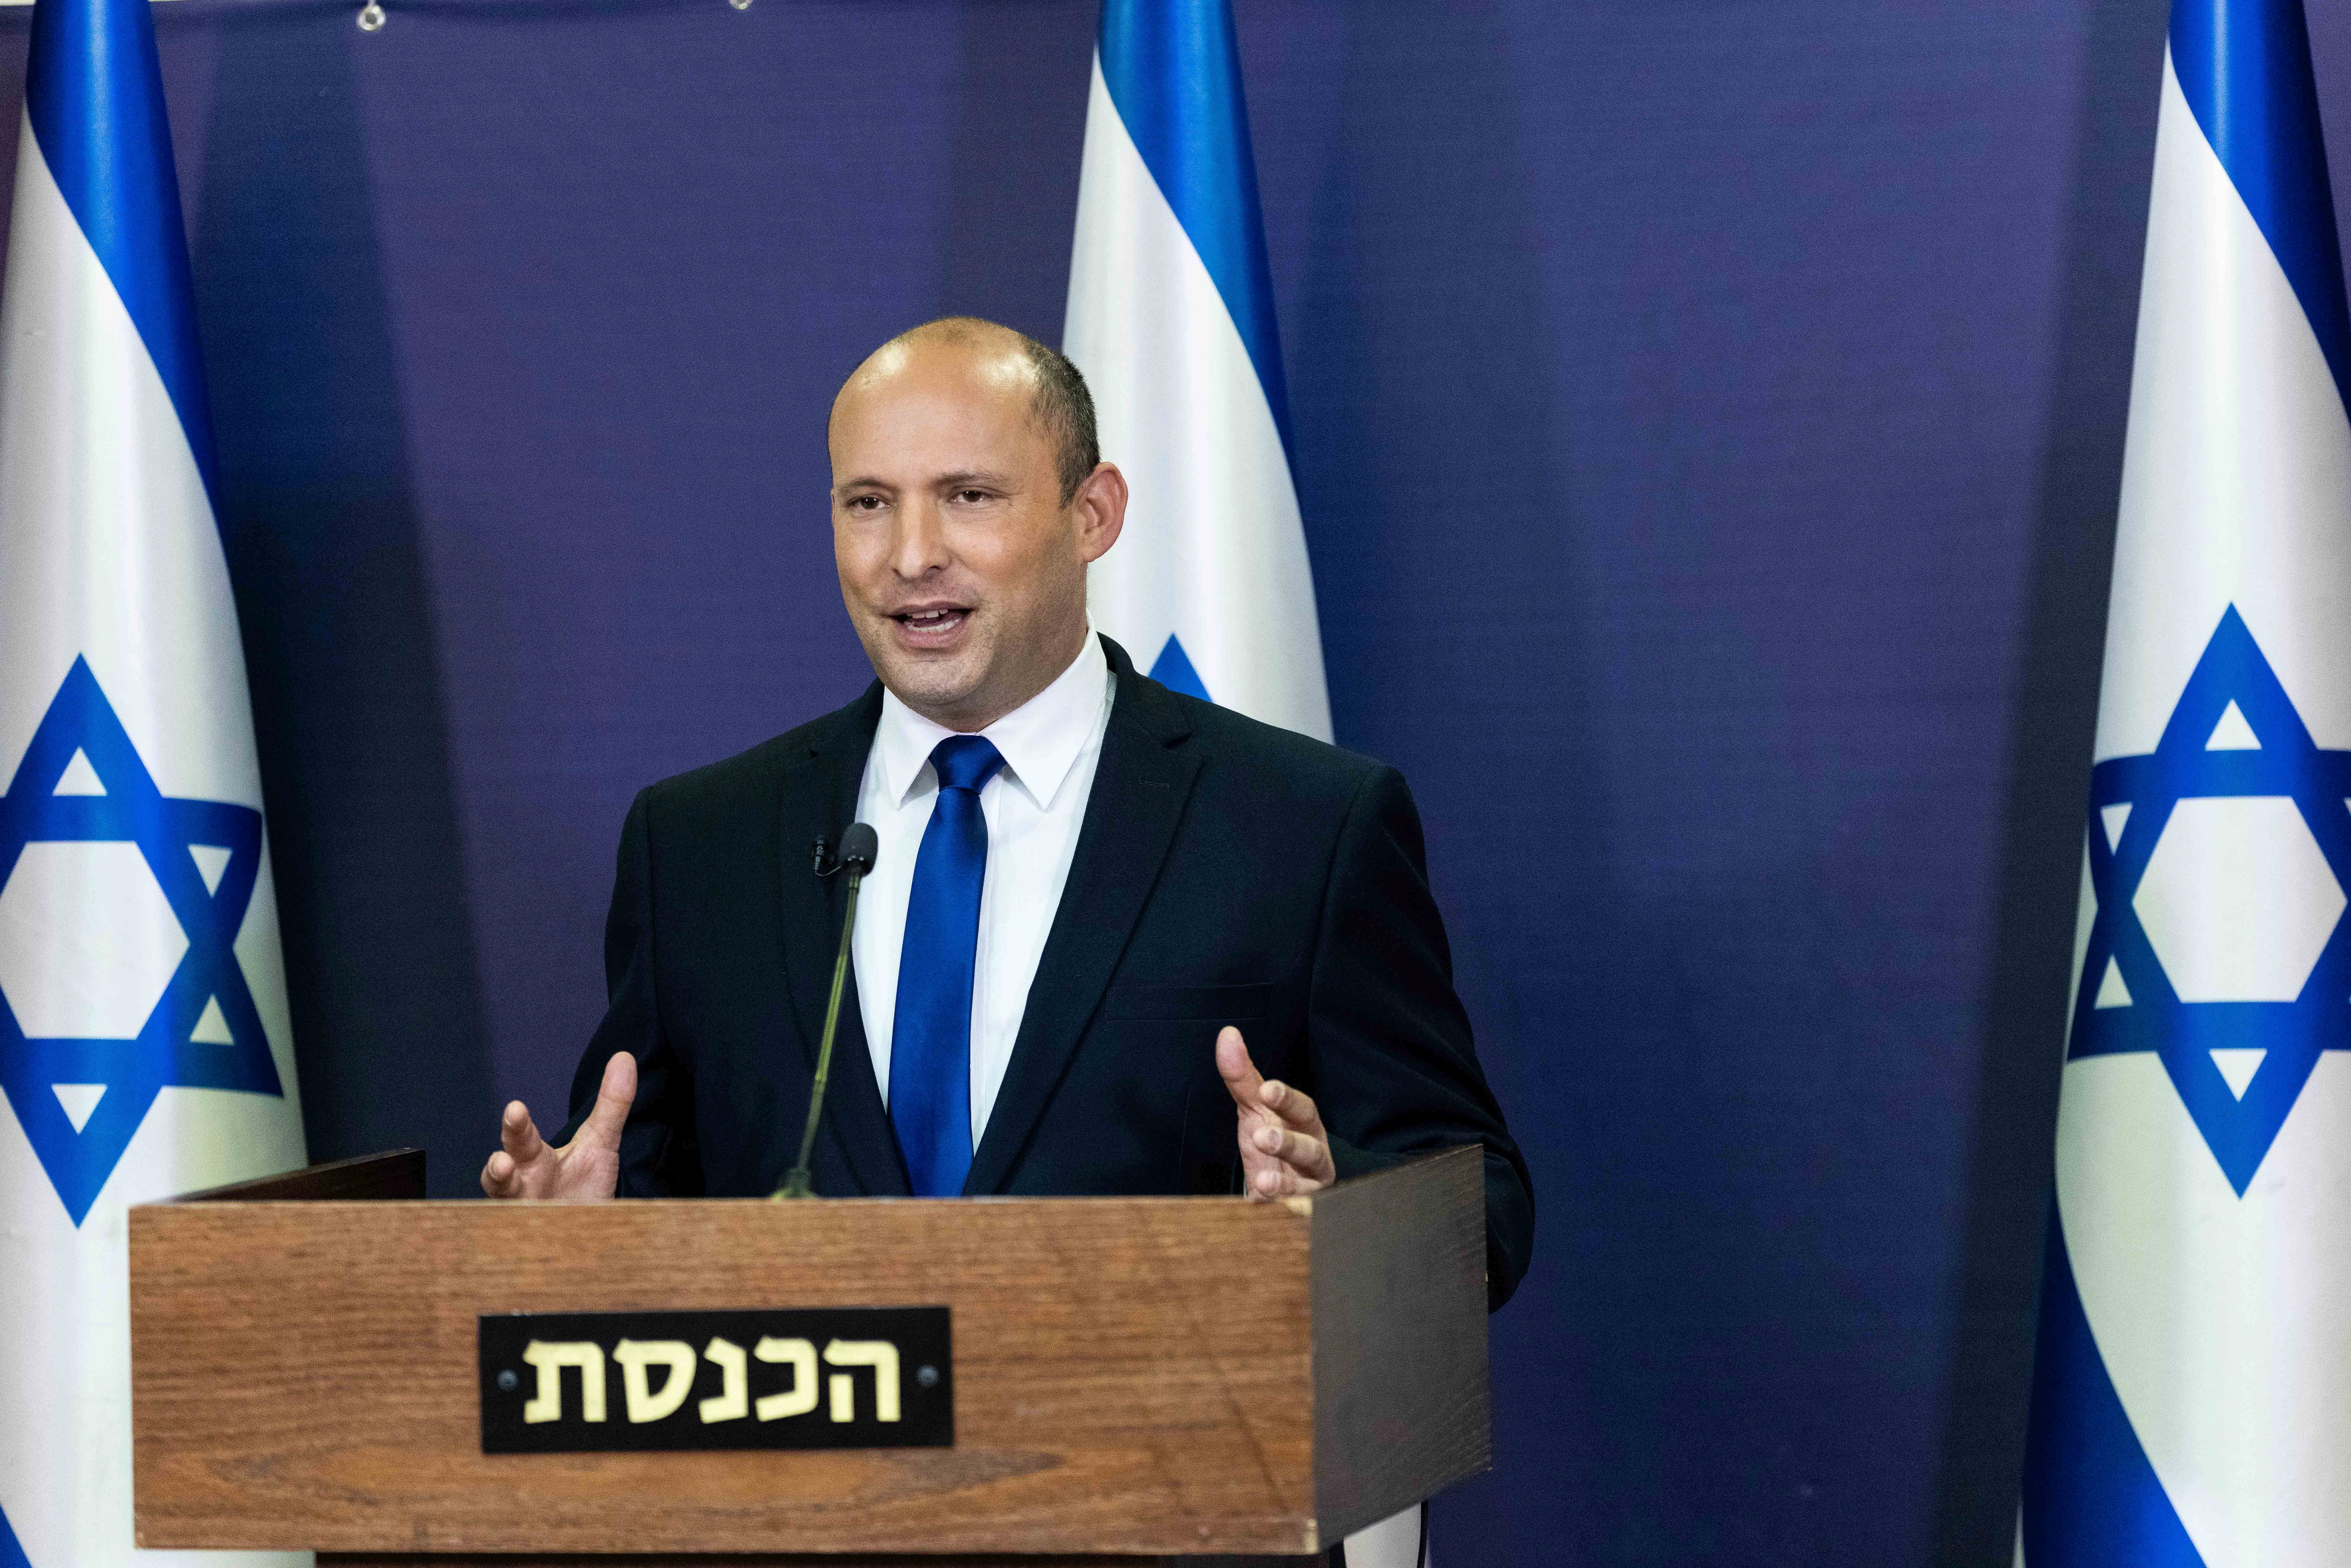 Leader of the Yamina party Naftali Bennett delivers a statement in the Knesset, the Israeli Parliament, in Jerusalem